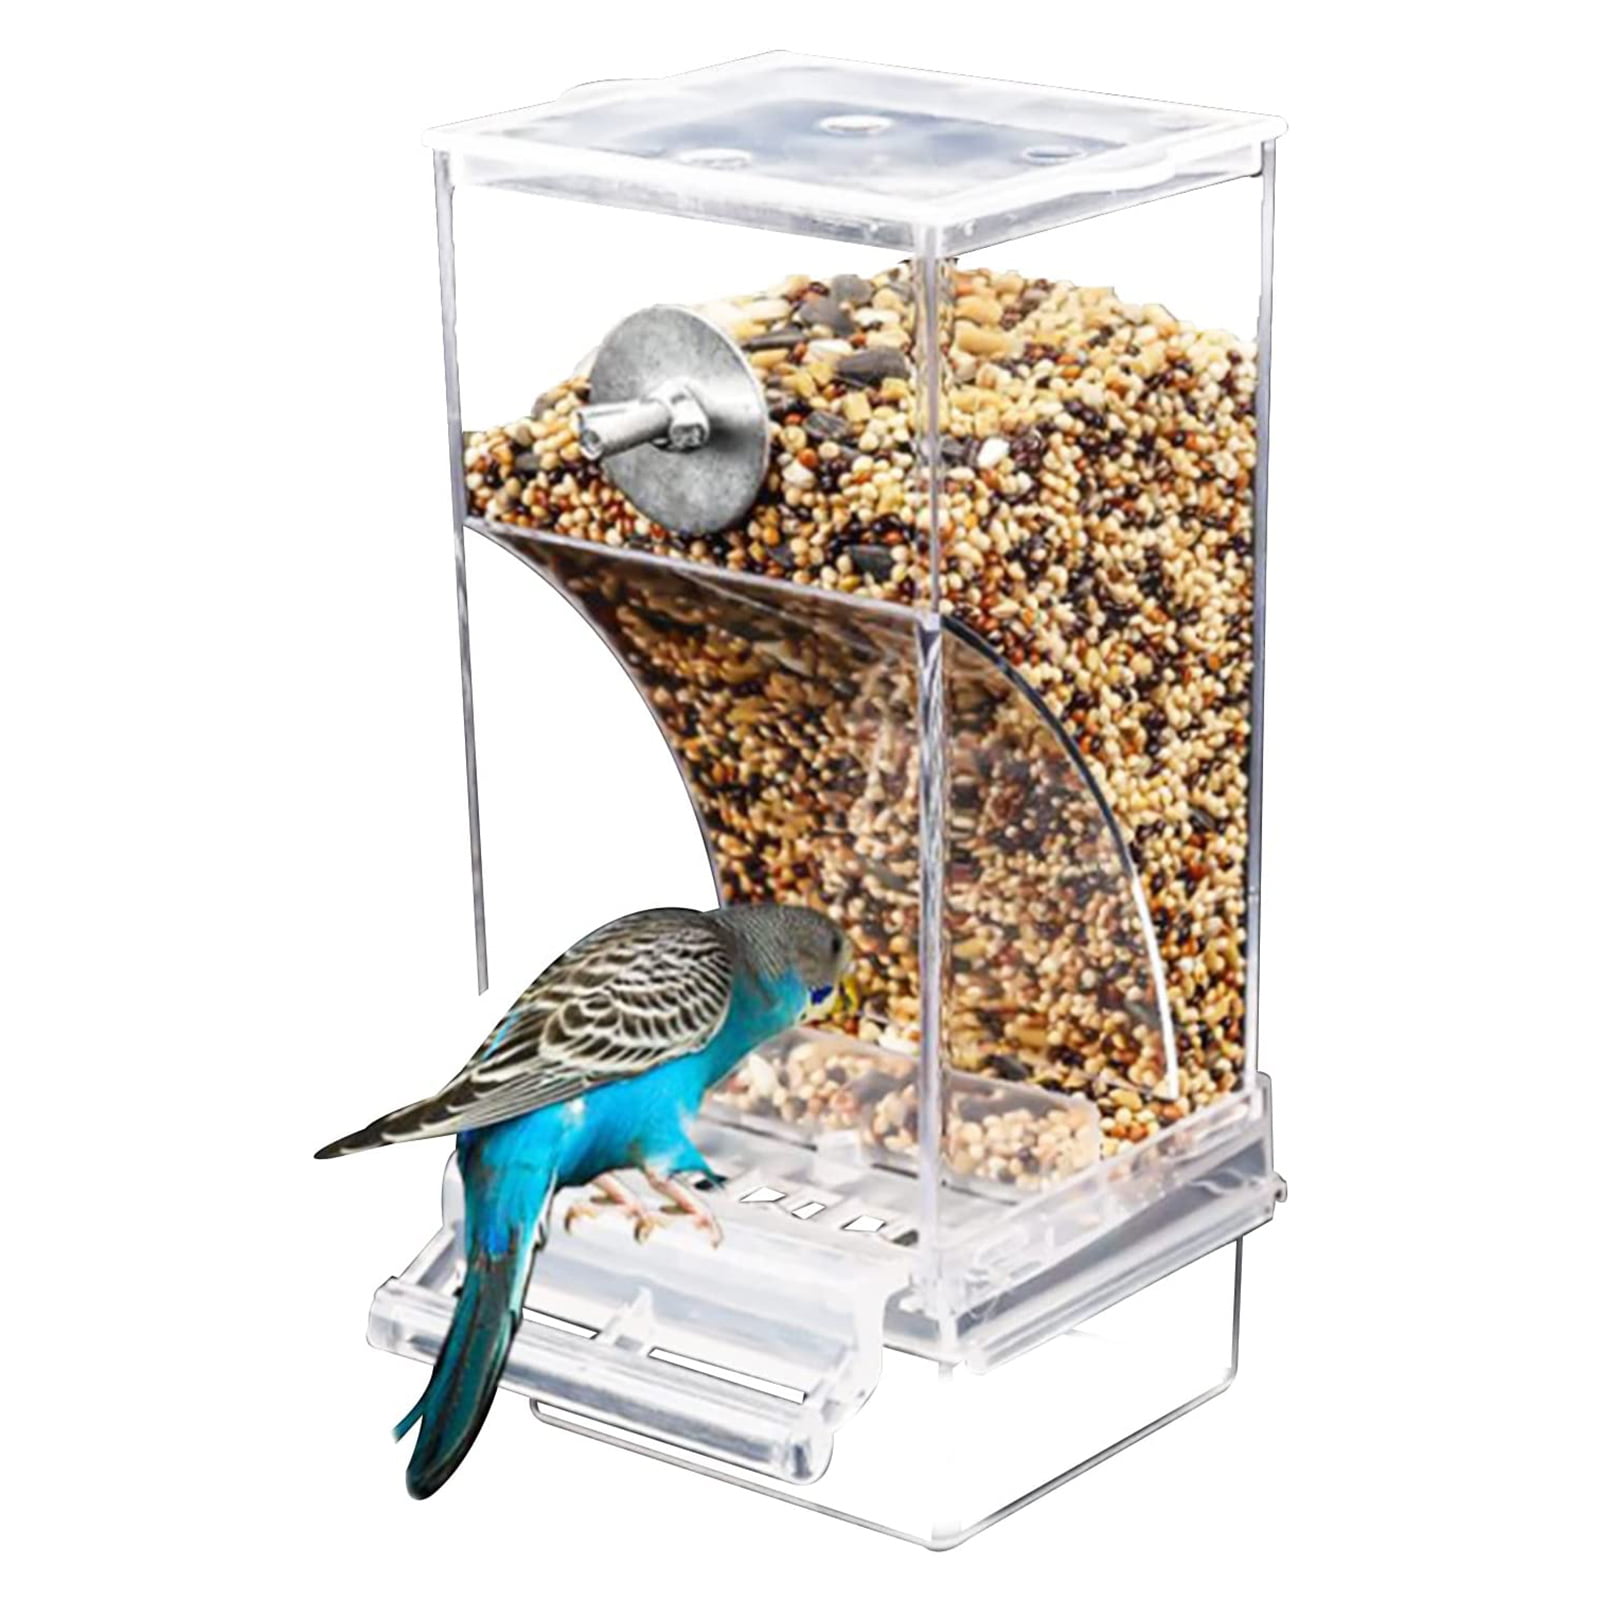 BLSMU Parakeet Water Dispenser,No-Mess Parrot Feeder,Macaw Waterer,Cockatiel Cage Accessories,Automatic Feeding for African Greys,Budgies,Finch and Other Bird 2Pcs